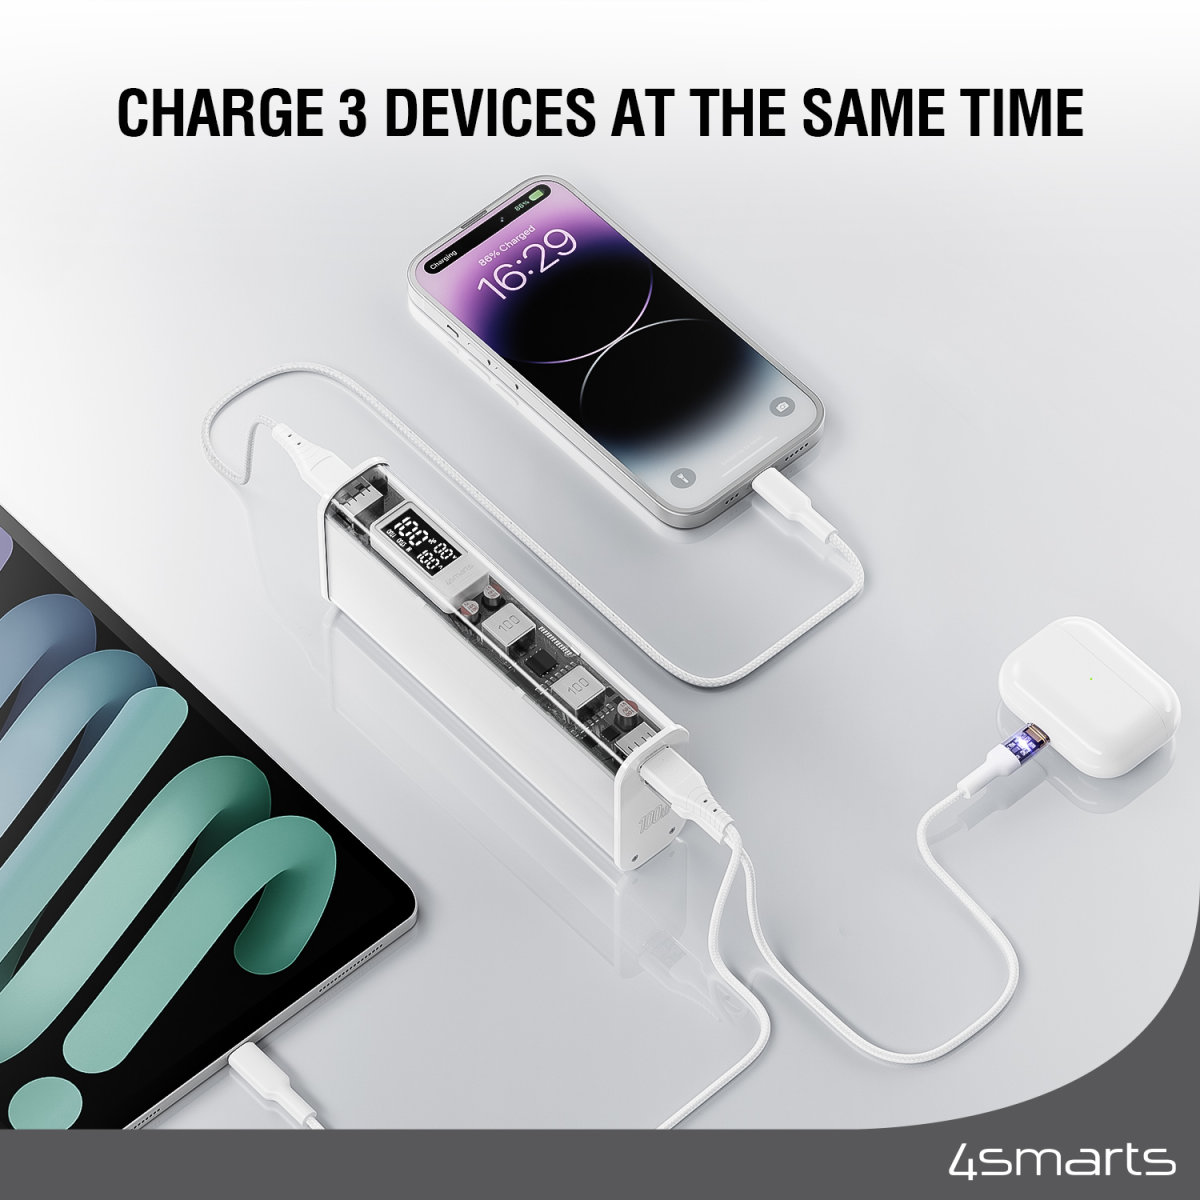 4smarts 100W Lucid Powerbank 20000mAh charges up to 3 devices at the same time.